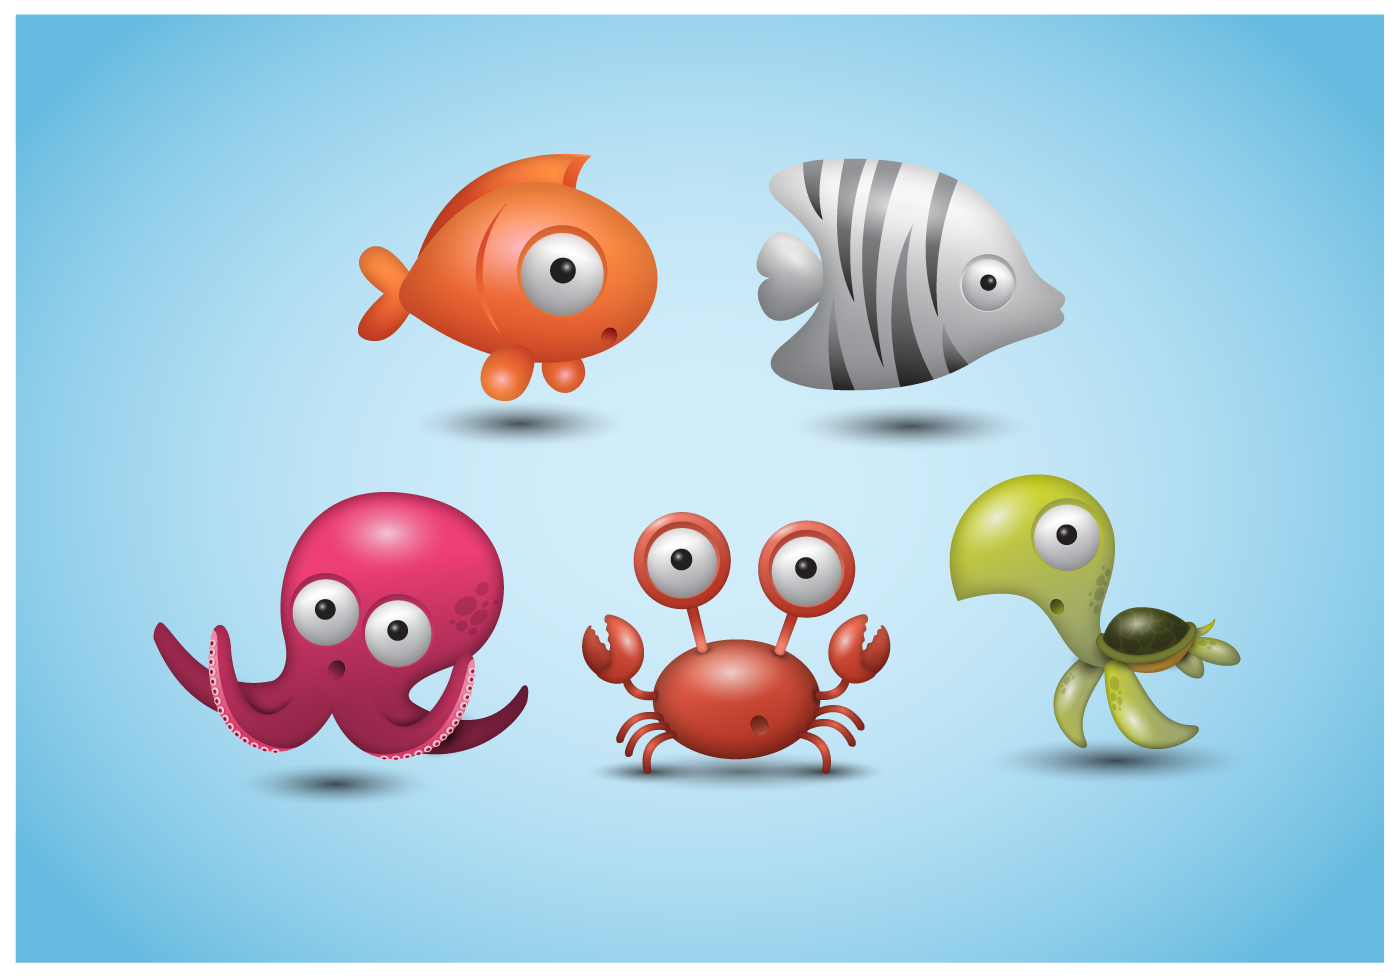 Download Cute Animal Icons Vector - Download Free Vector Art, Stock Graphics & Images